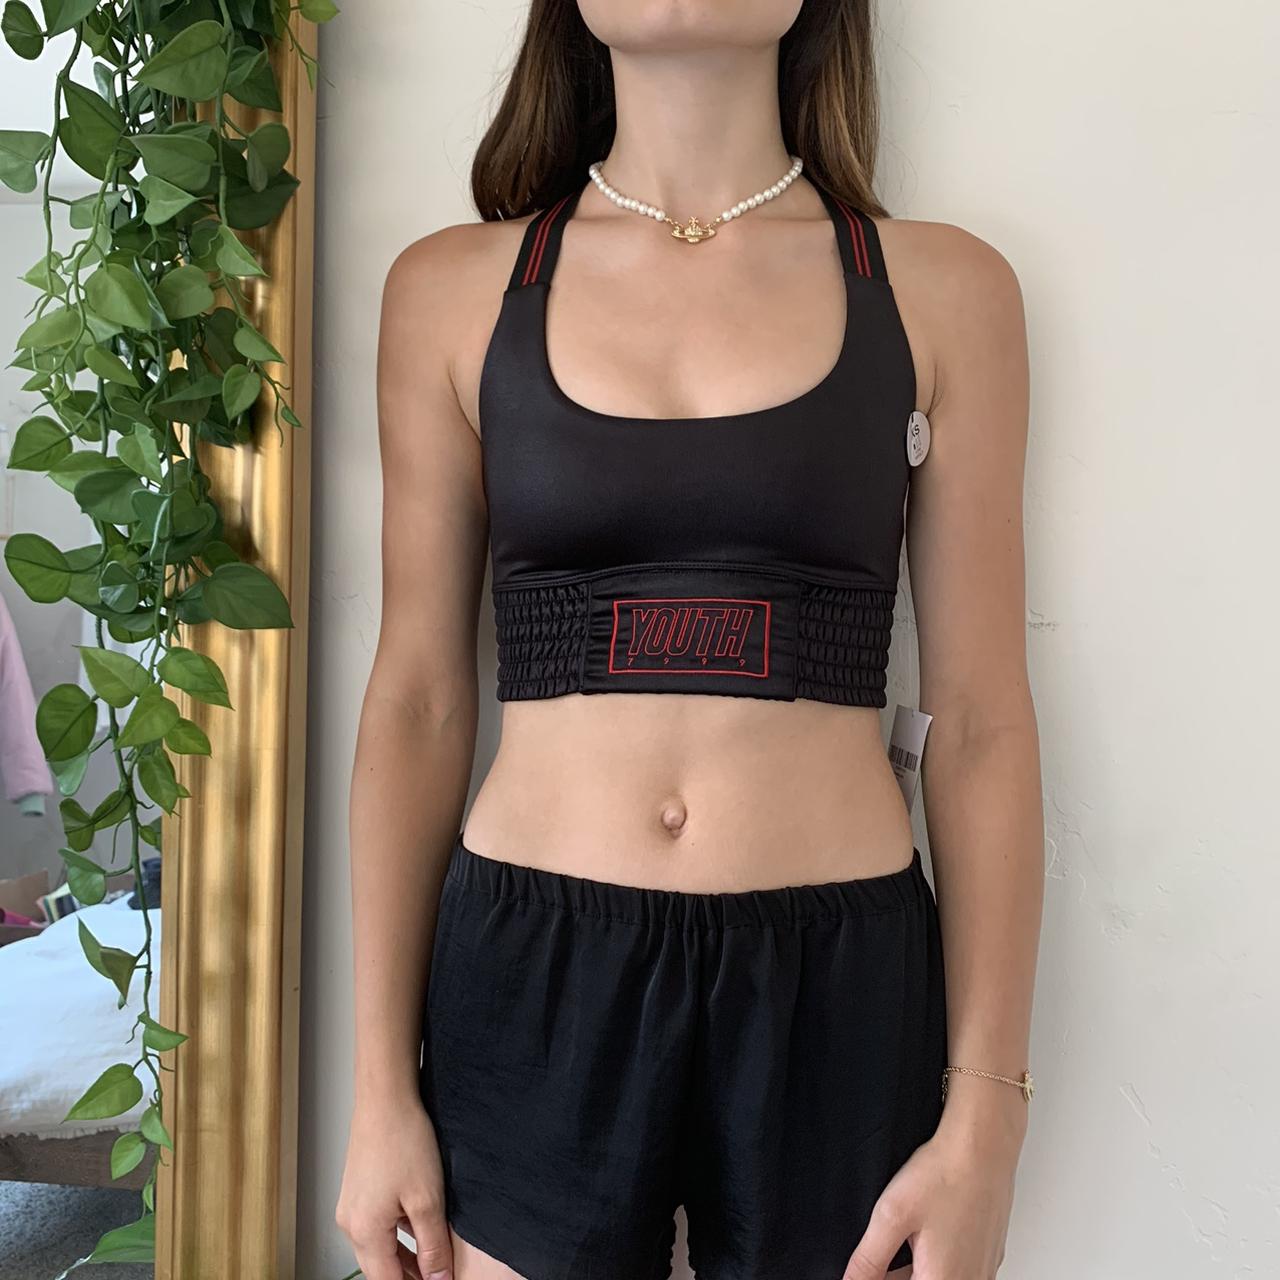 Forever 21 Black and Red Sports Bra. It says Youth - Depop